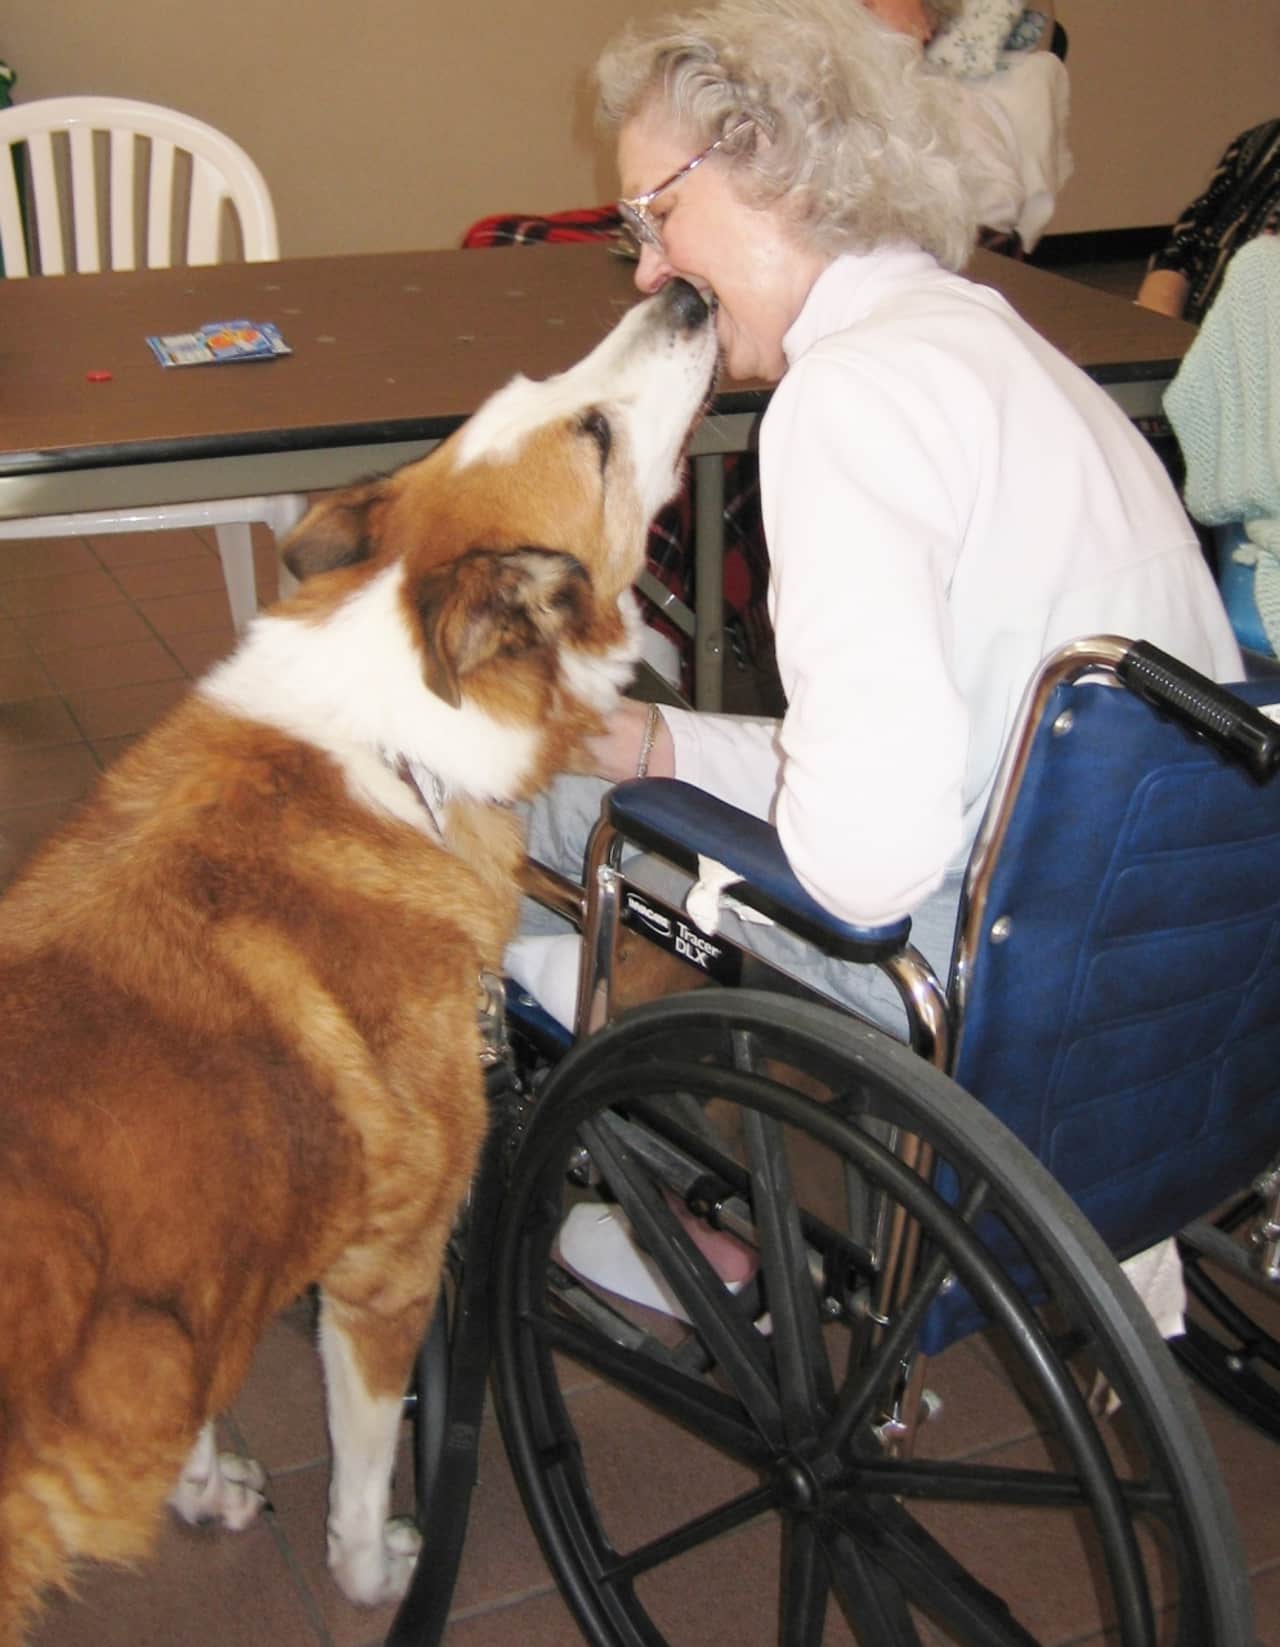 Golden Outreach is a pet visitation program based in Briarcliff Manor that utilizes animals to help people feel and get better. The program is actively seeking sponsors for individual dogs chosen as Outreach pets.